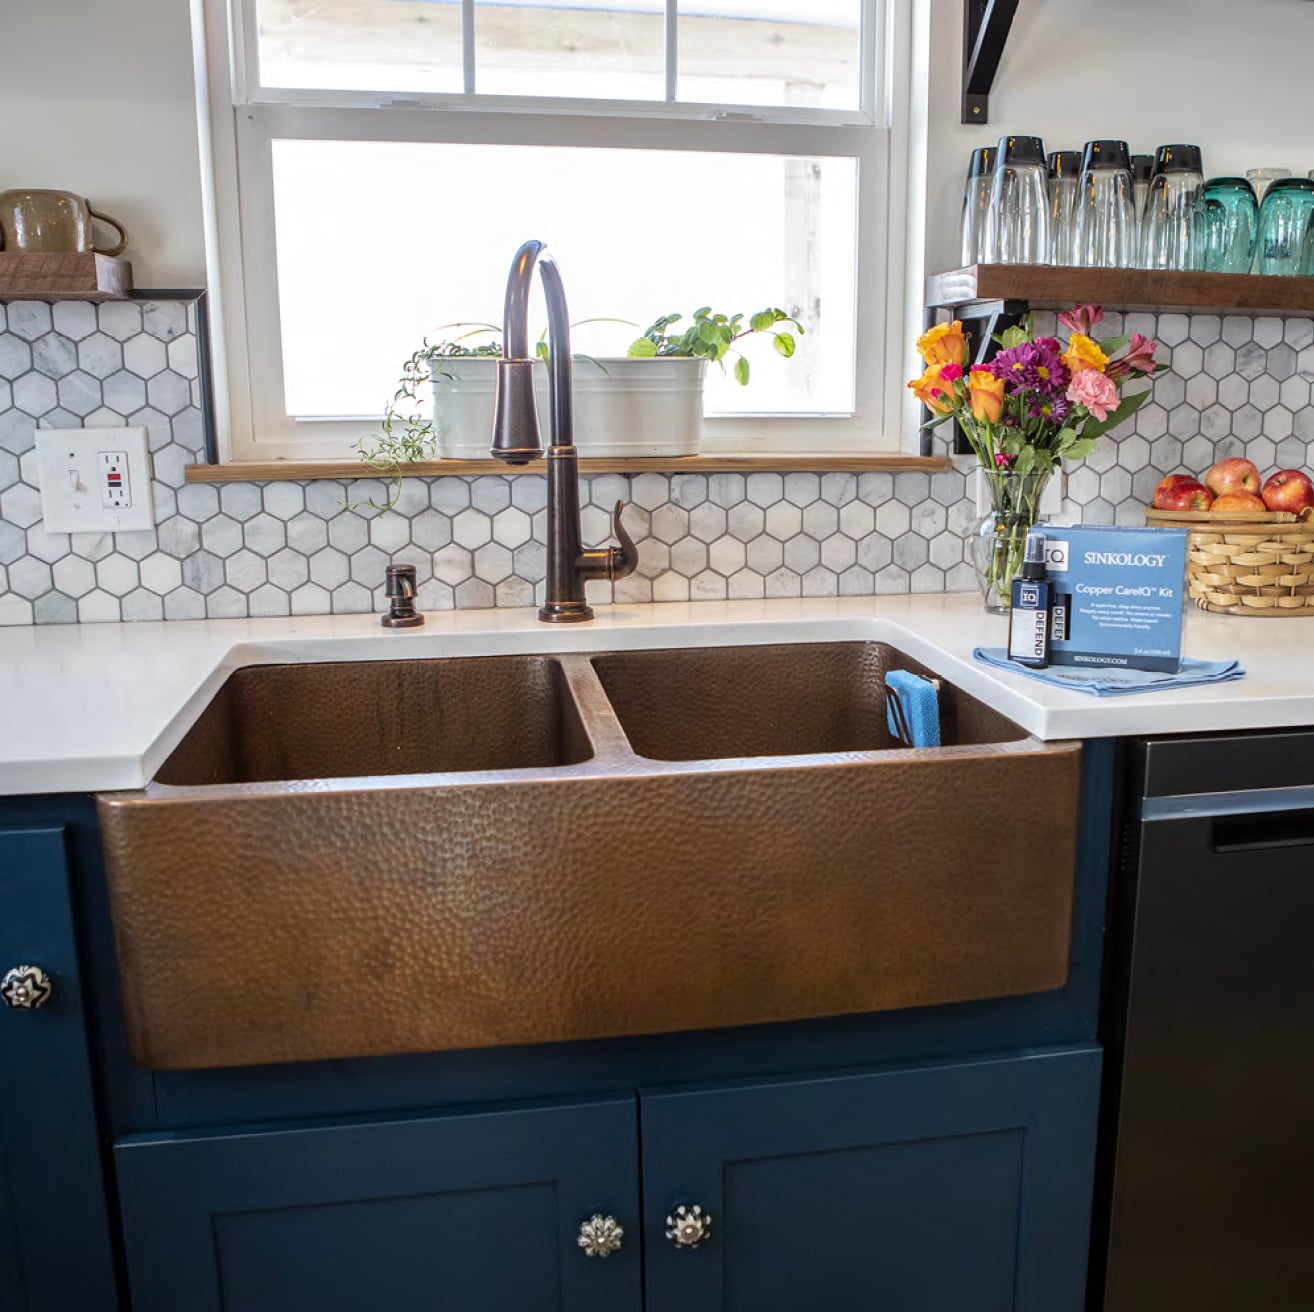 Adams Undermount Farmhouse Apron Front 33-in x 22-in Antique Copper Double Equal Bowl Kitchen Sink | - SINKOLOGY K2A-1005ND